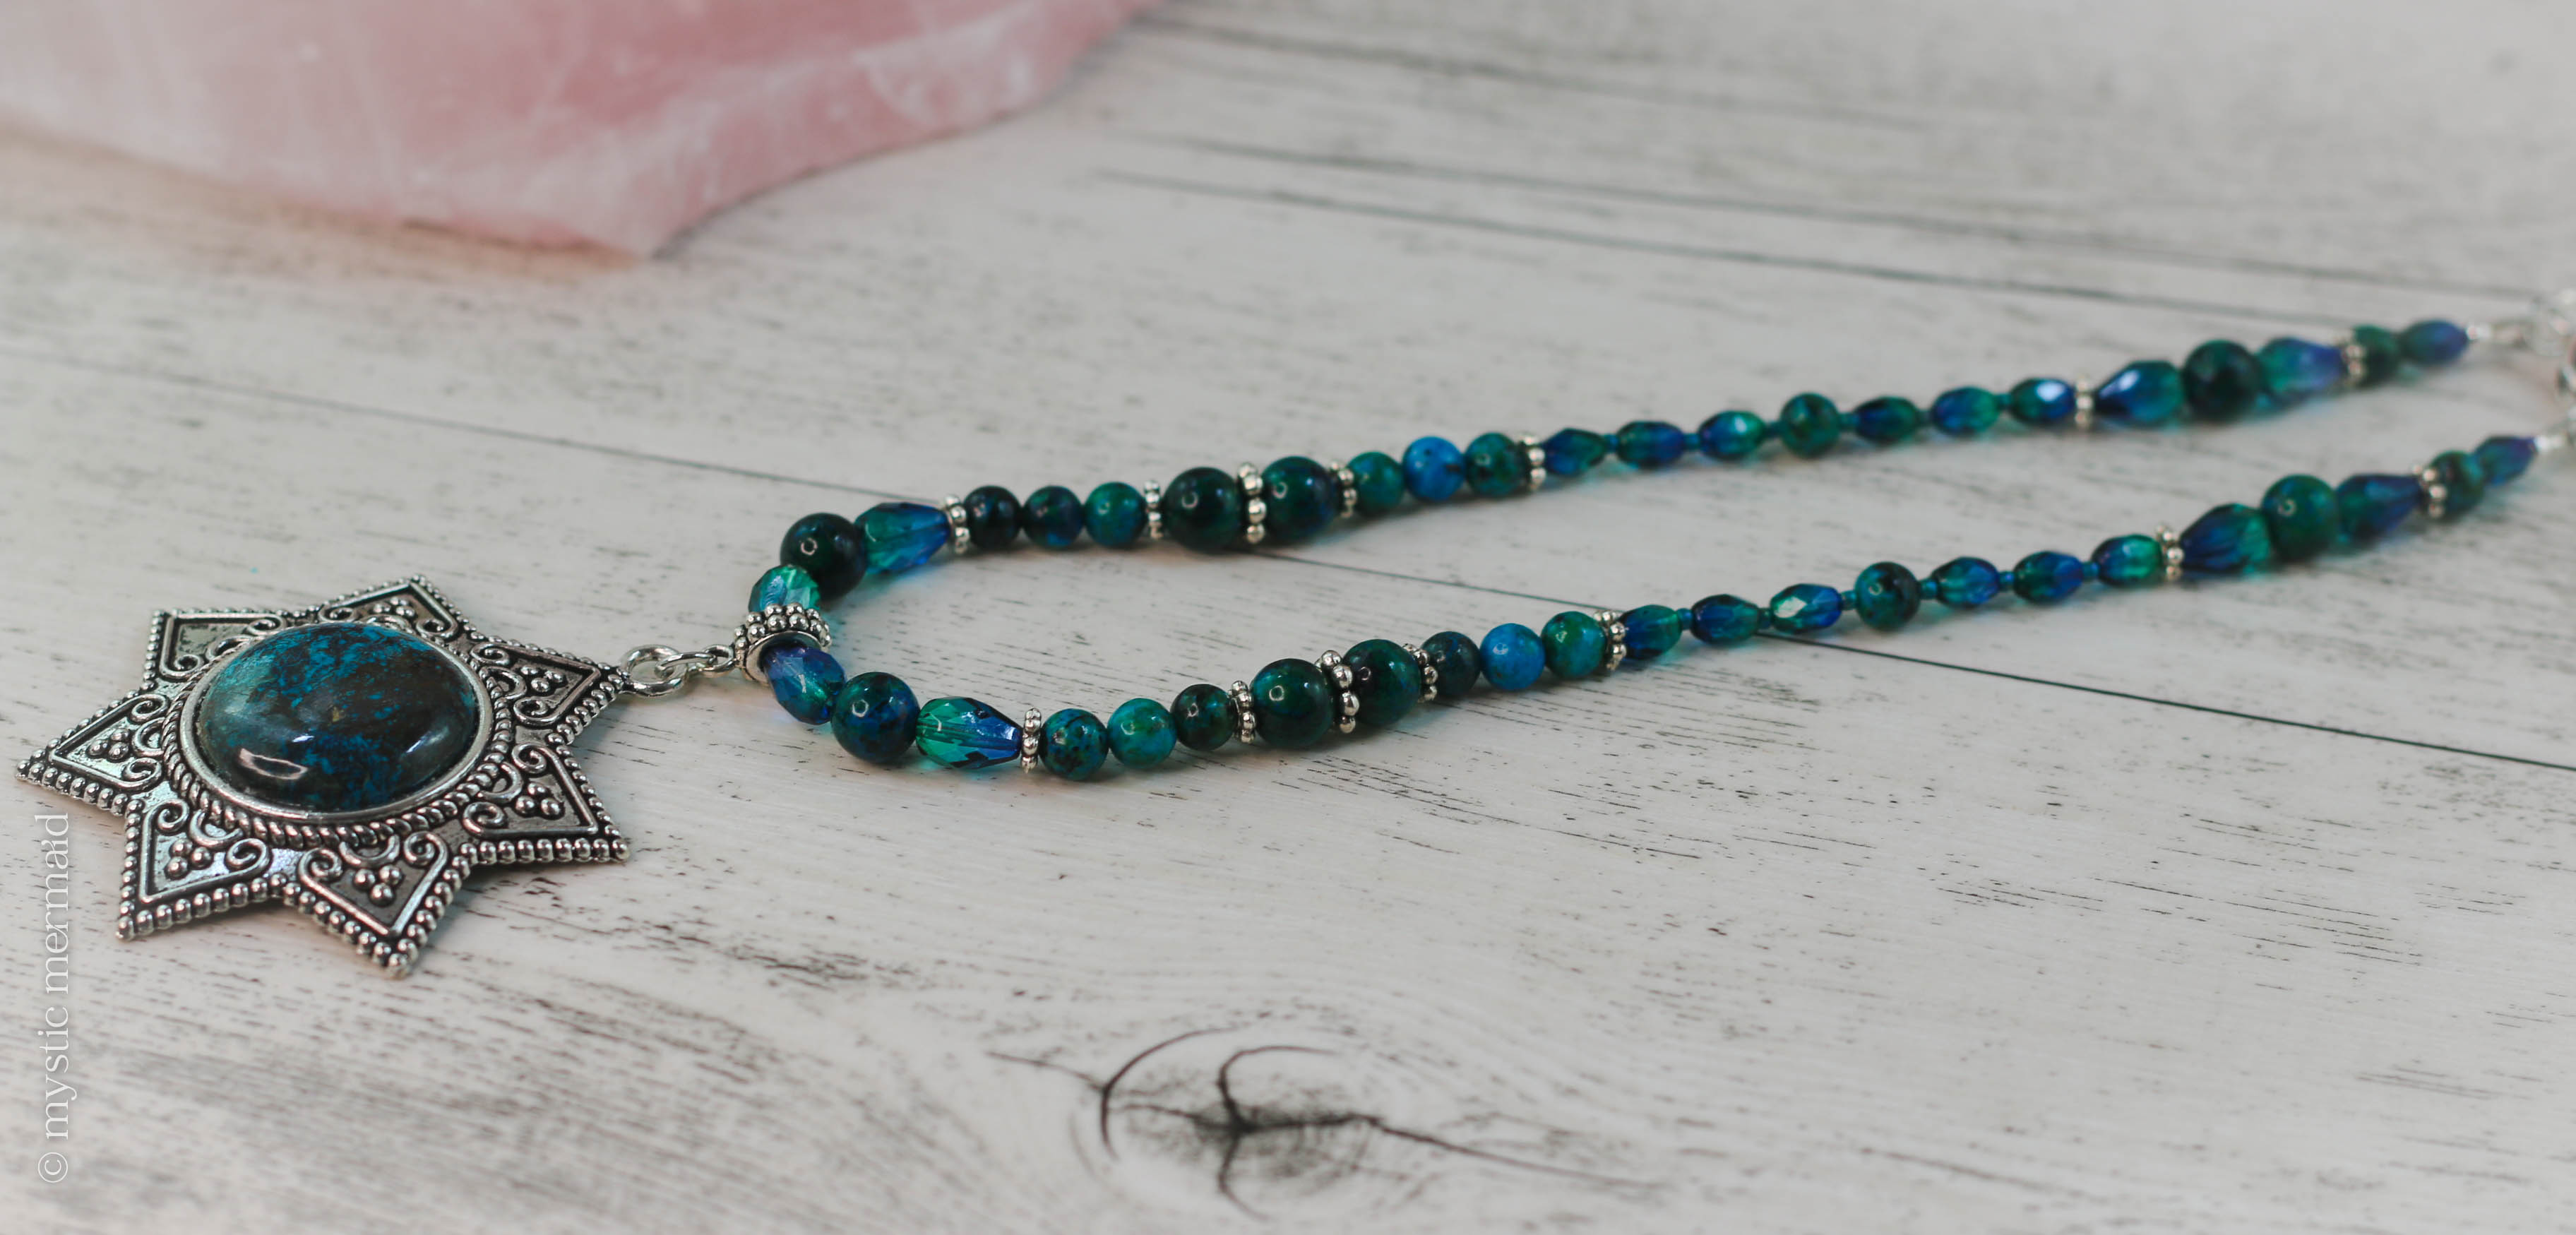 Express Yourself - Chrysocolla Necklace